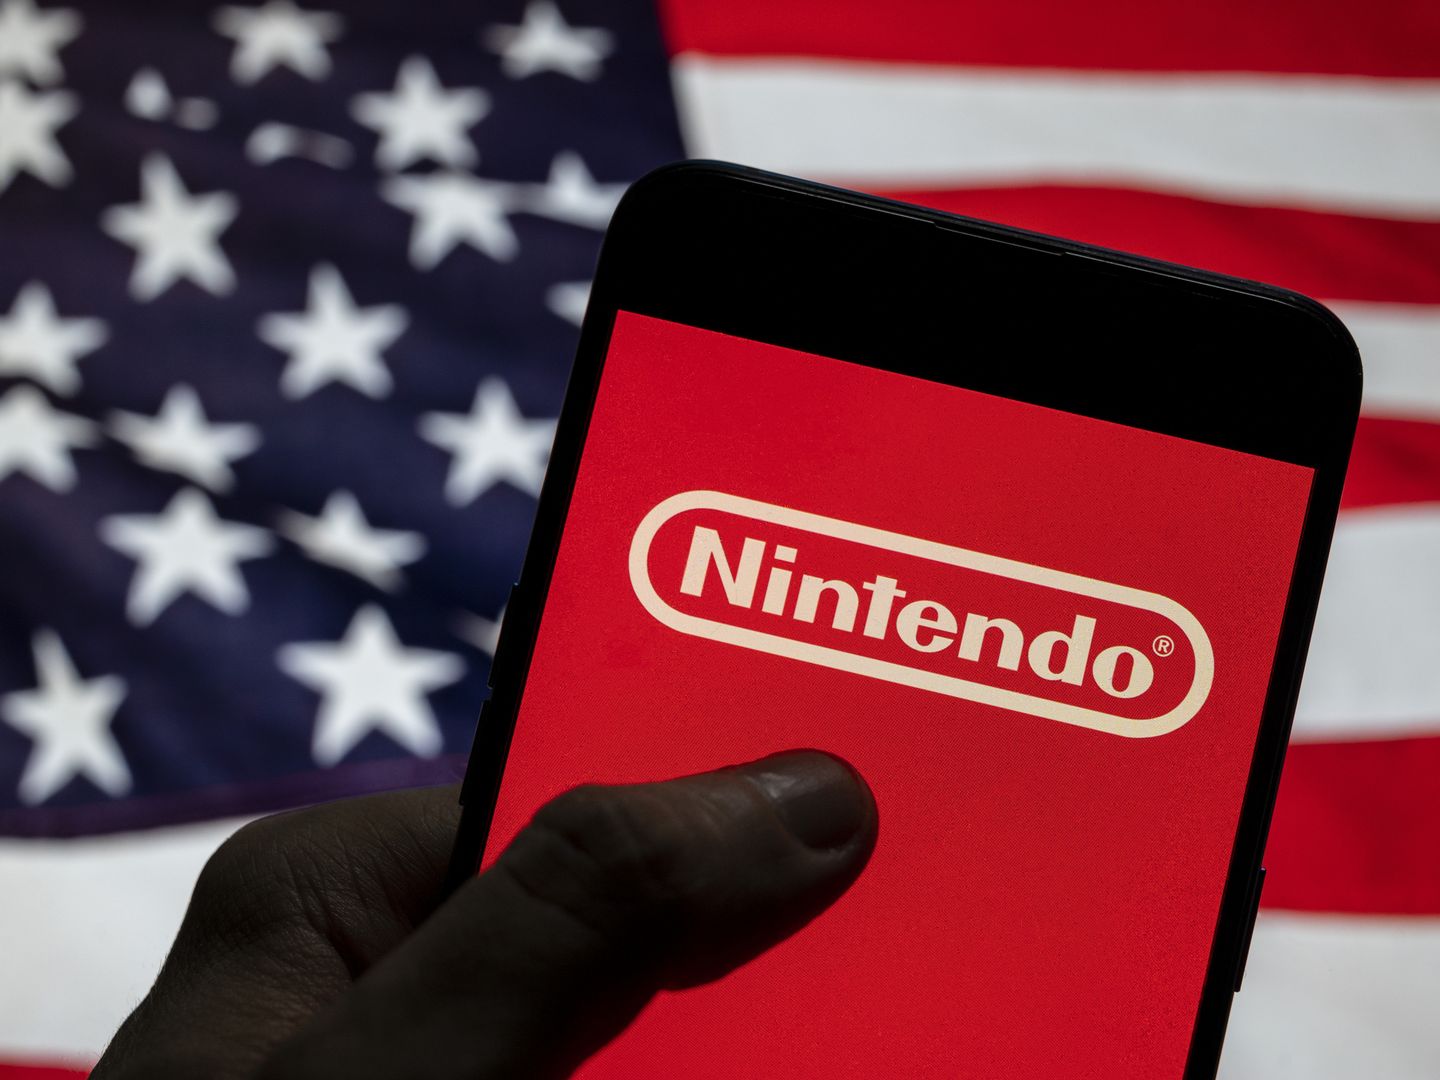 Nintendo and staffing agency met with NLRB labor complaint - Polygon